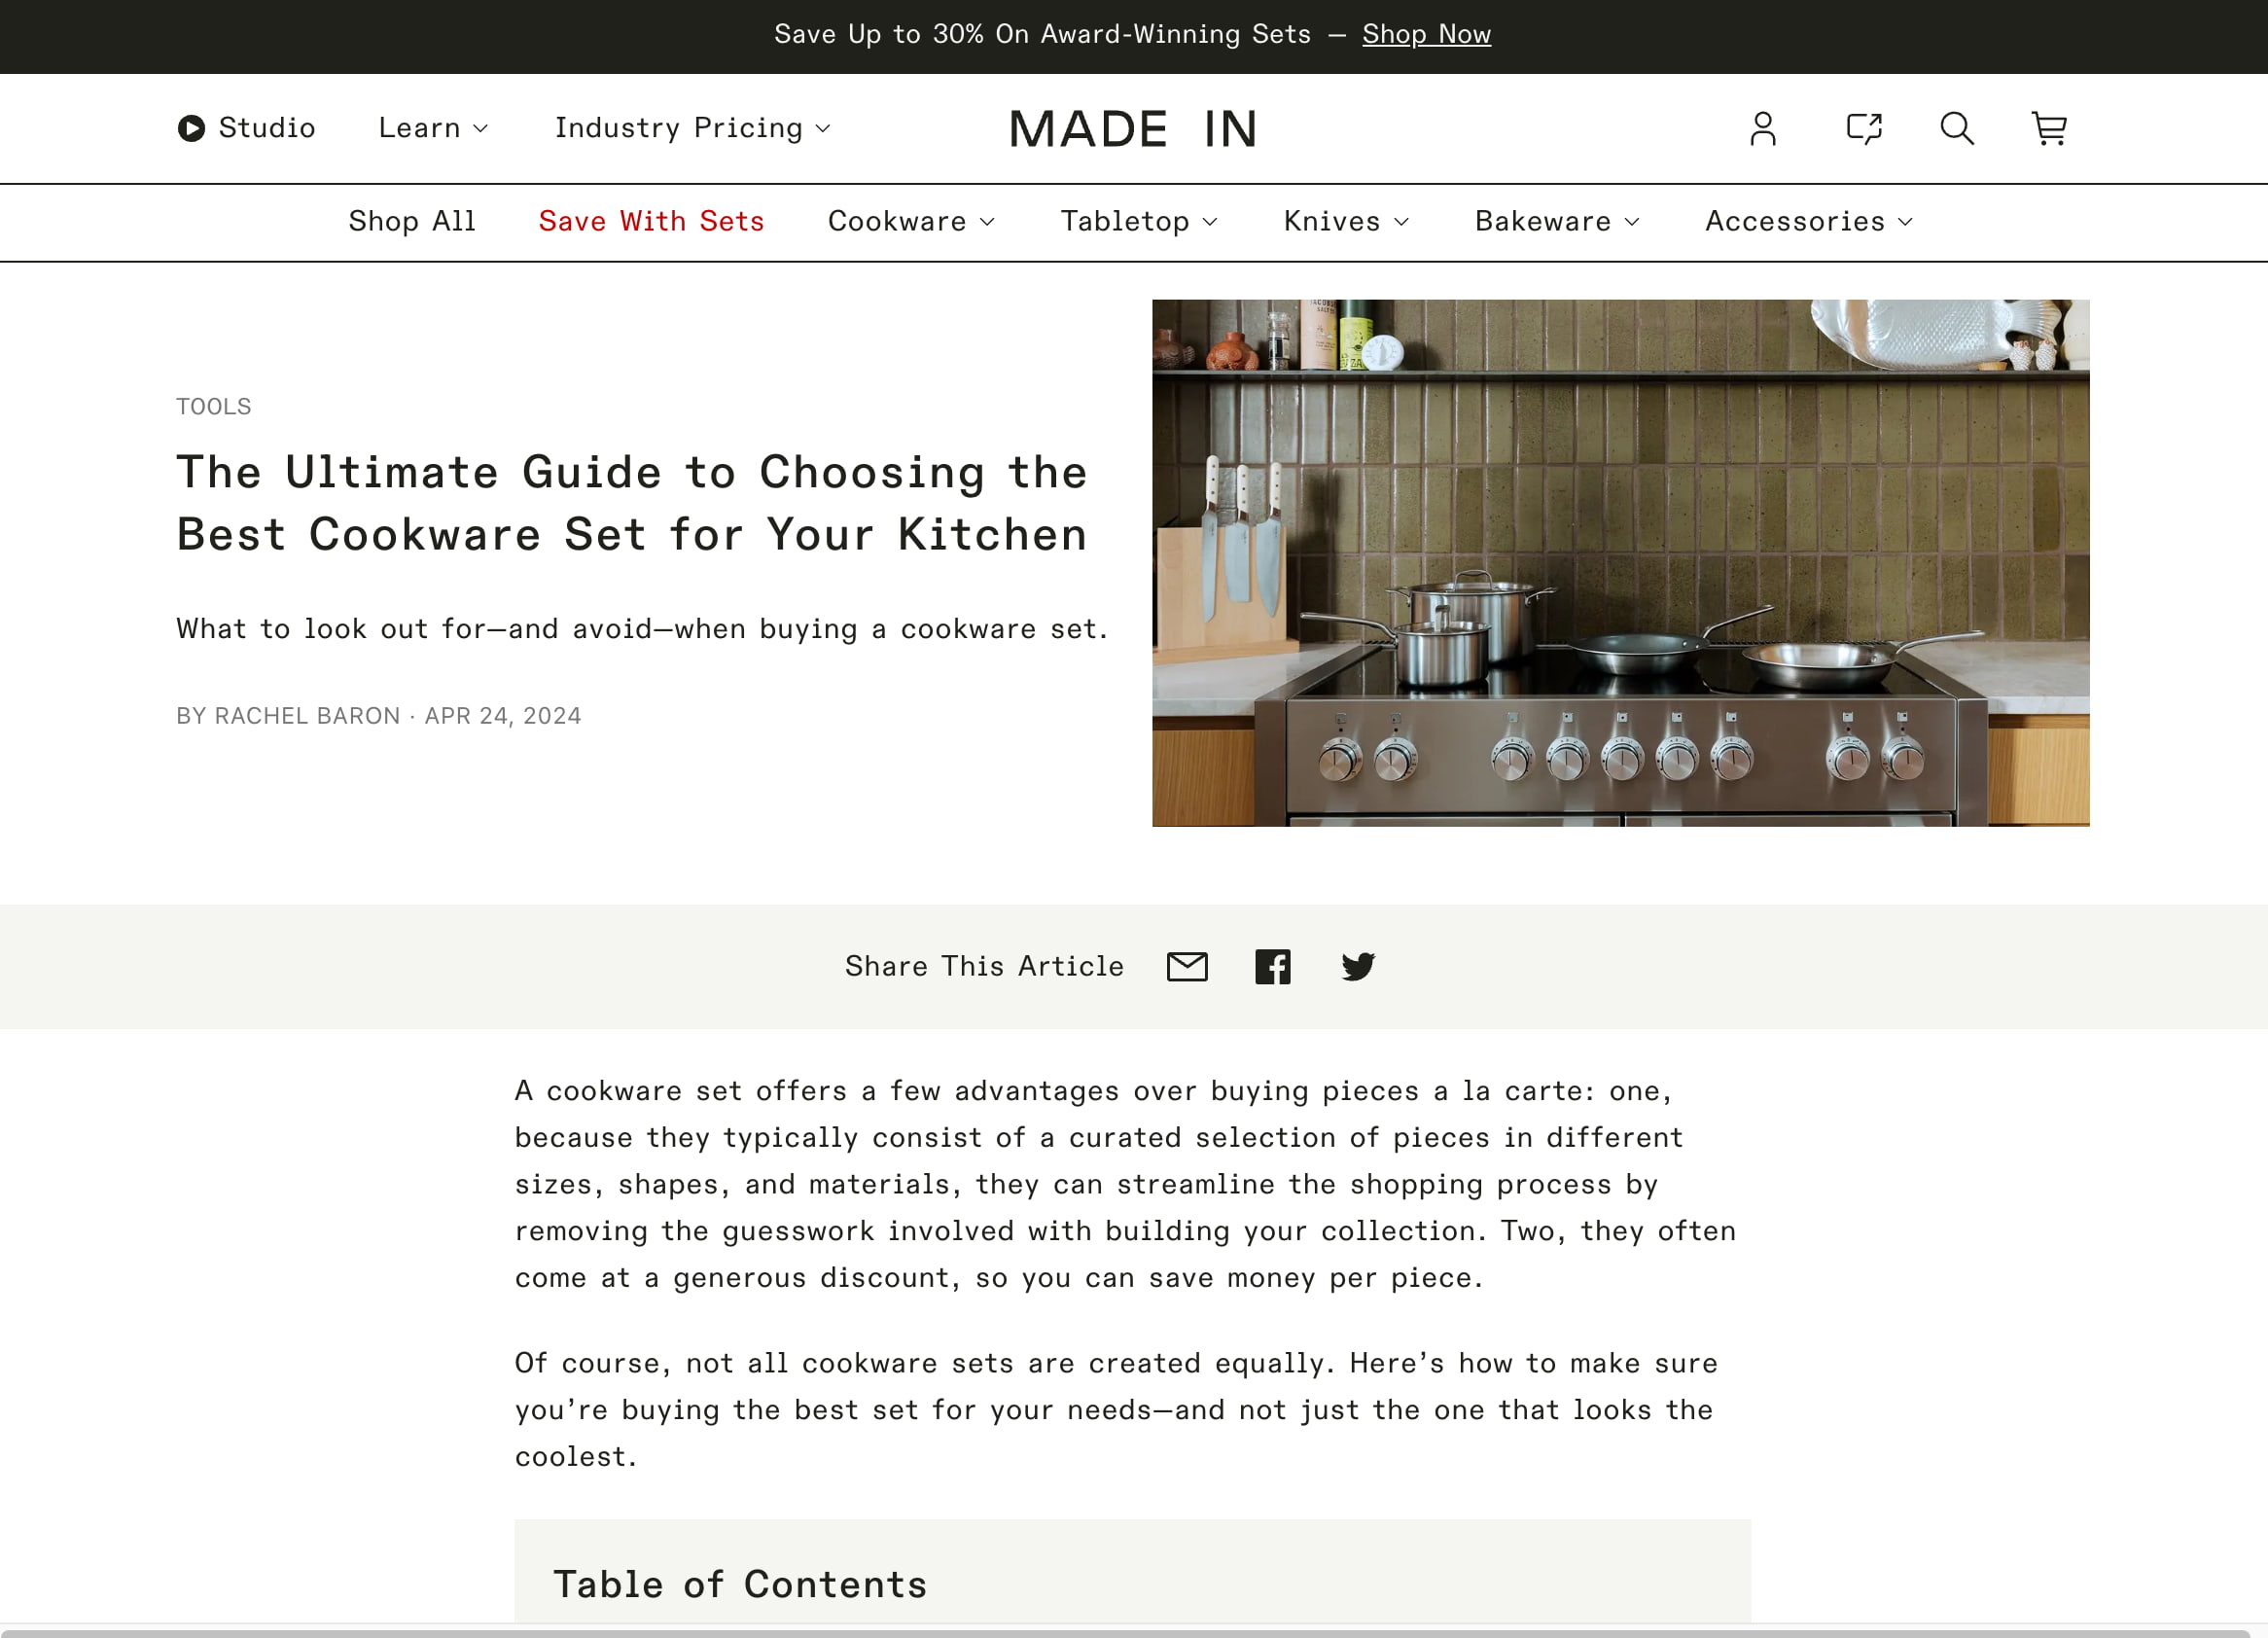 An example of an post on the Made In Cookware Shopify blog